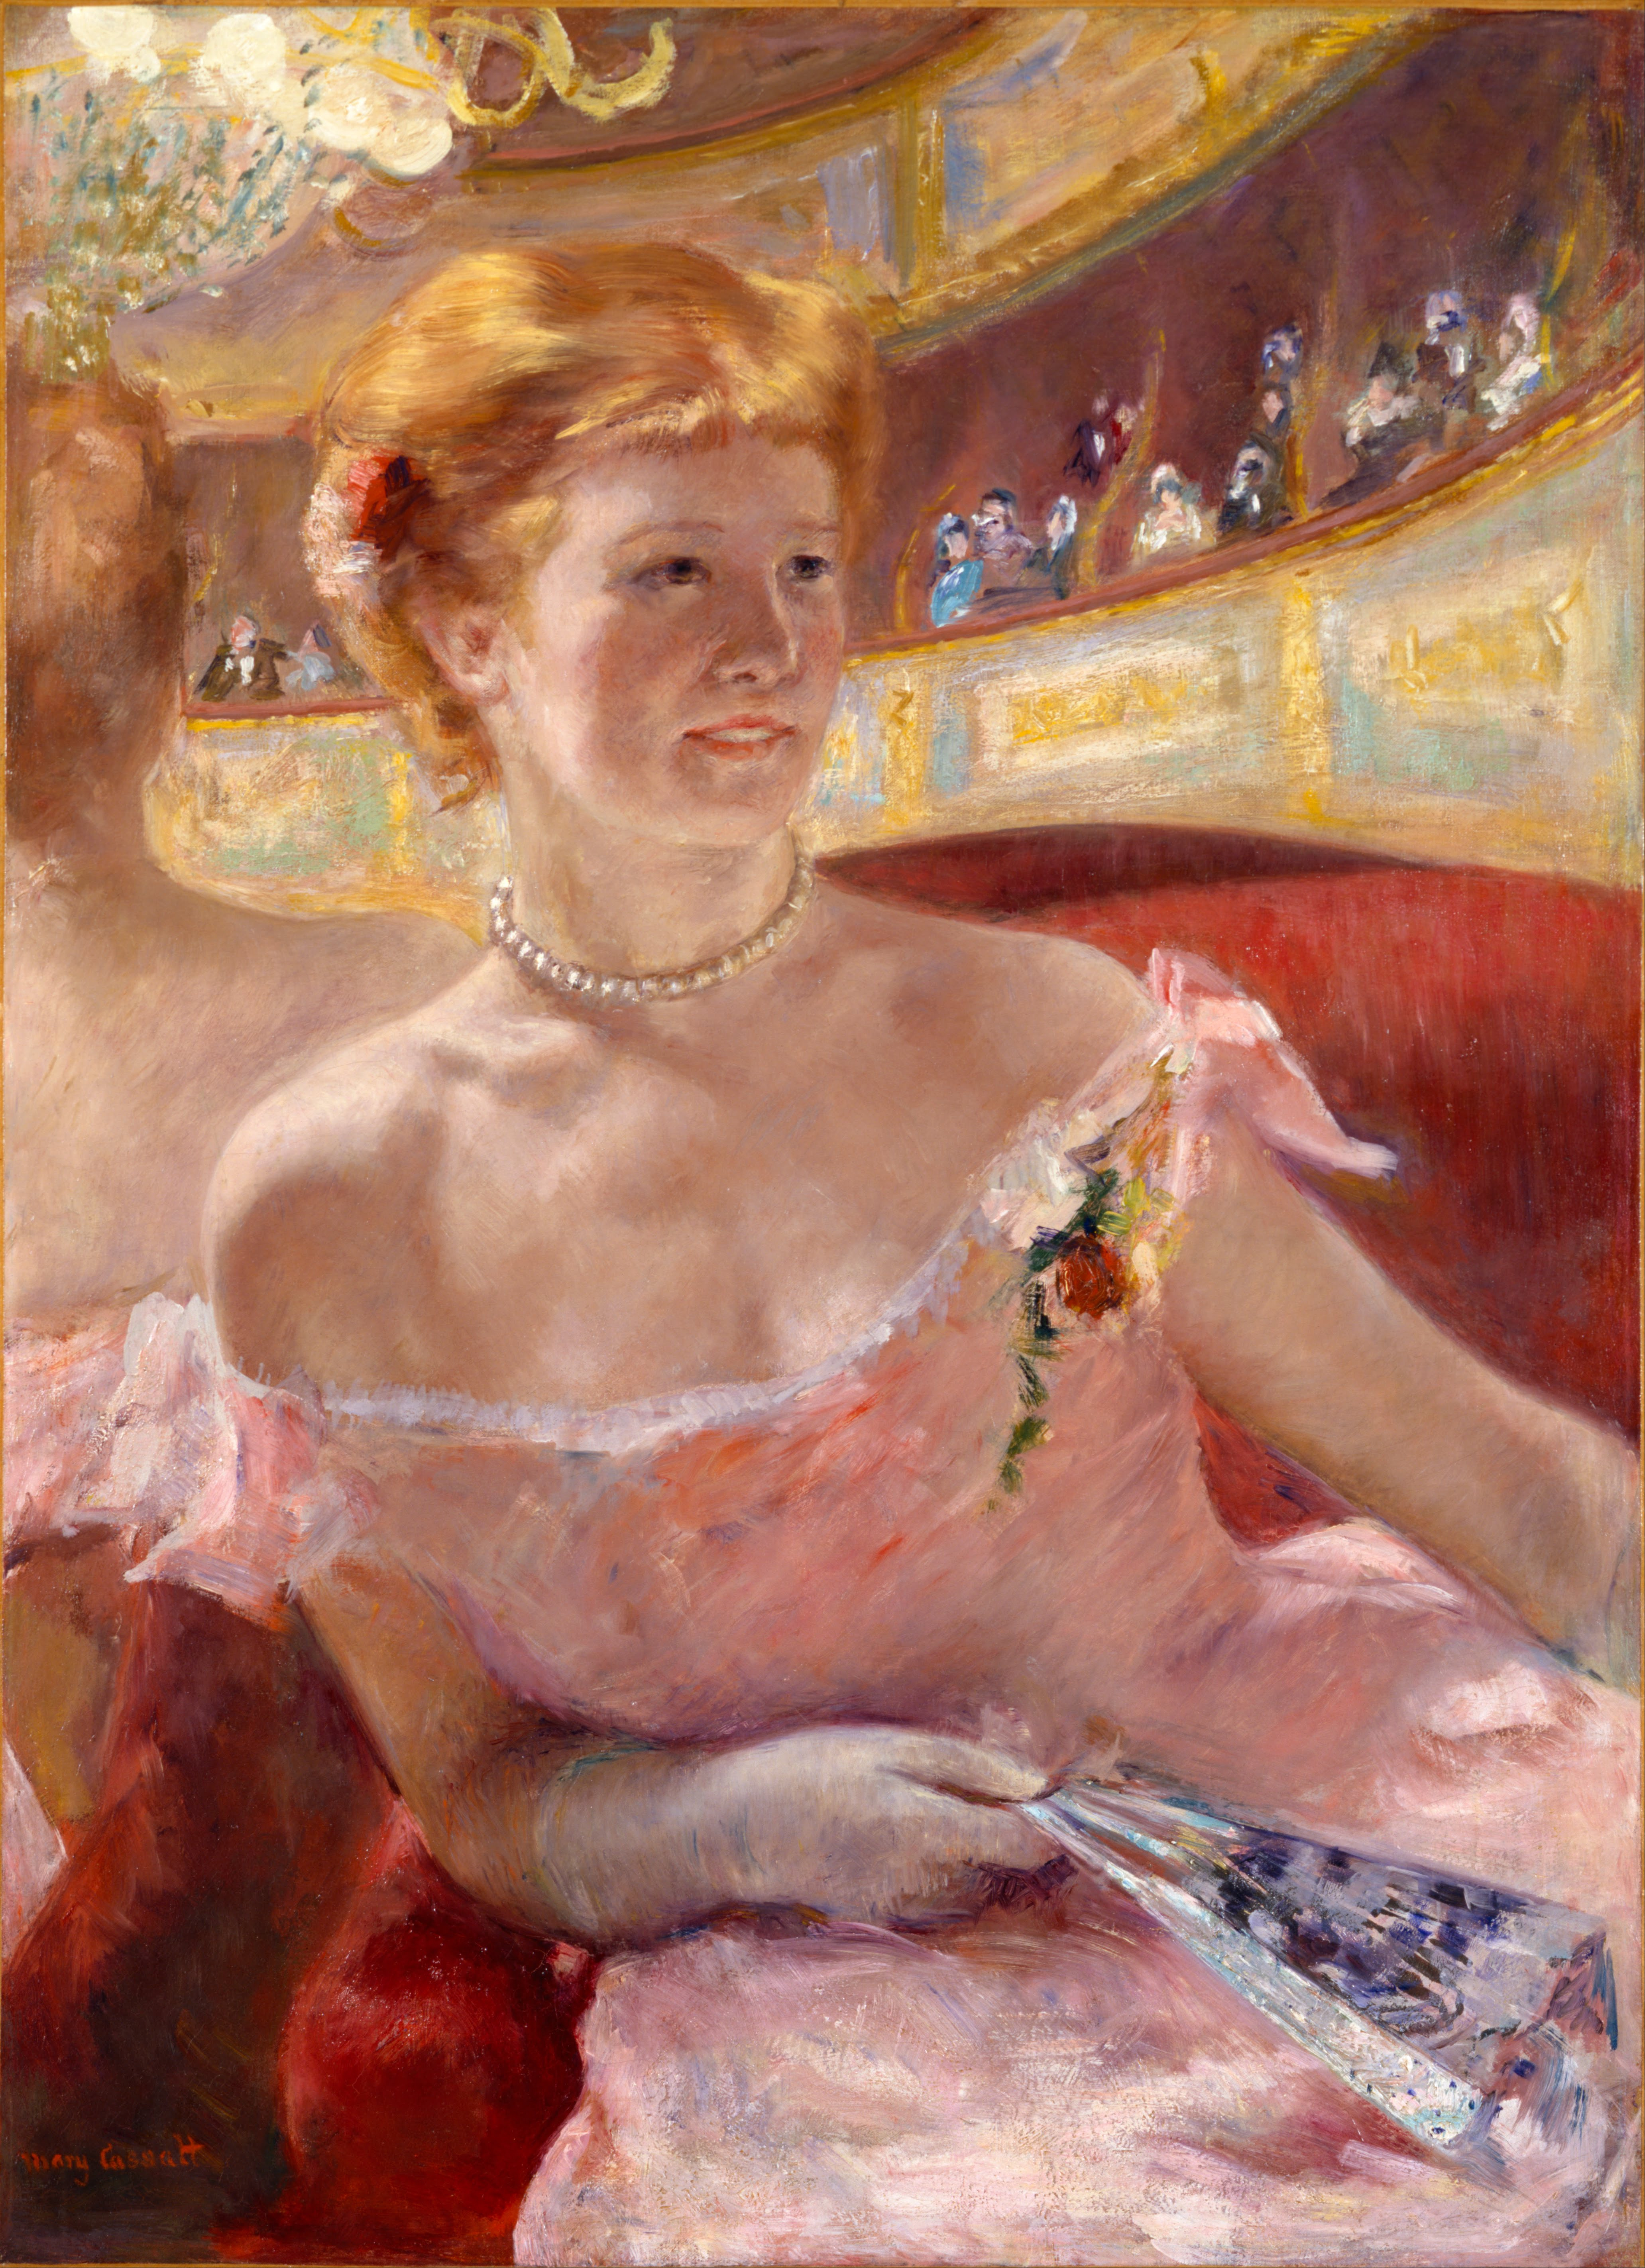 Woman with a Pearl Necklace in a Lofe by Mary Cassatt - 1879 - 81,3 x 59,7 cm 